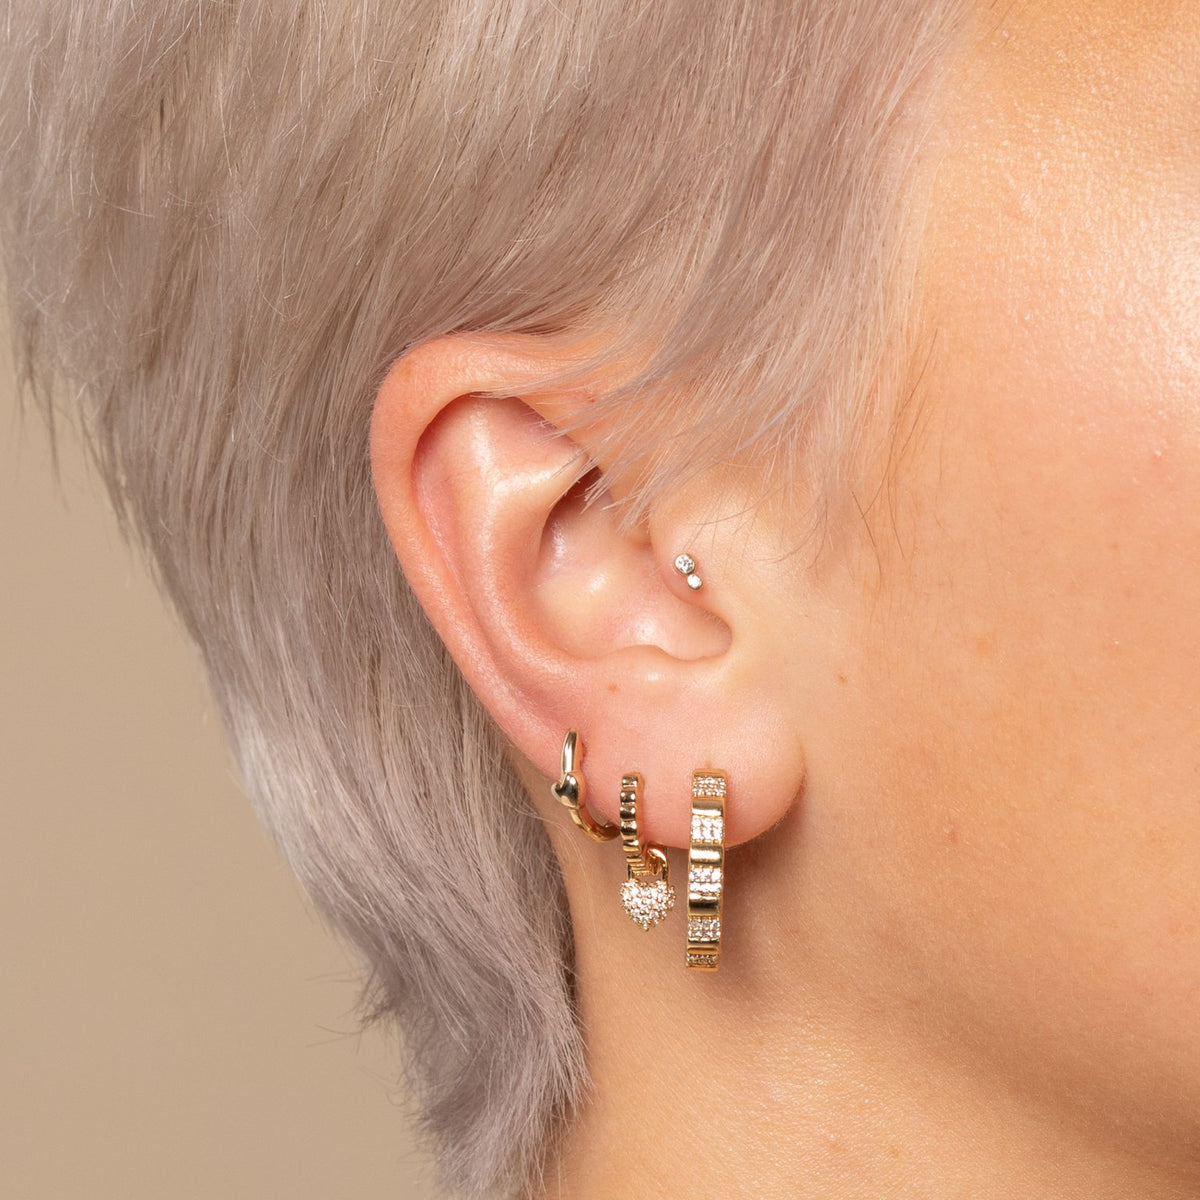 Tragus piercing - Everything you need to know